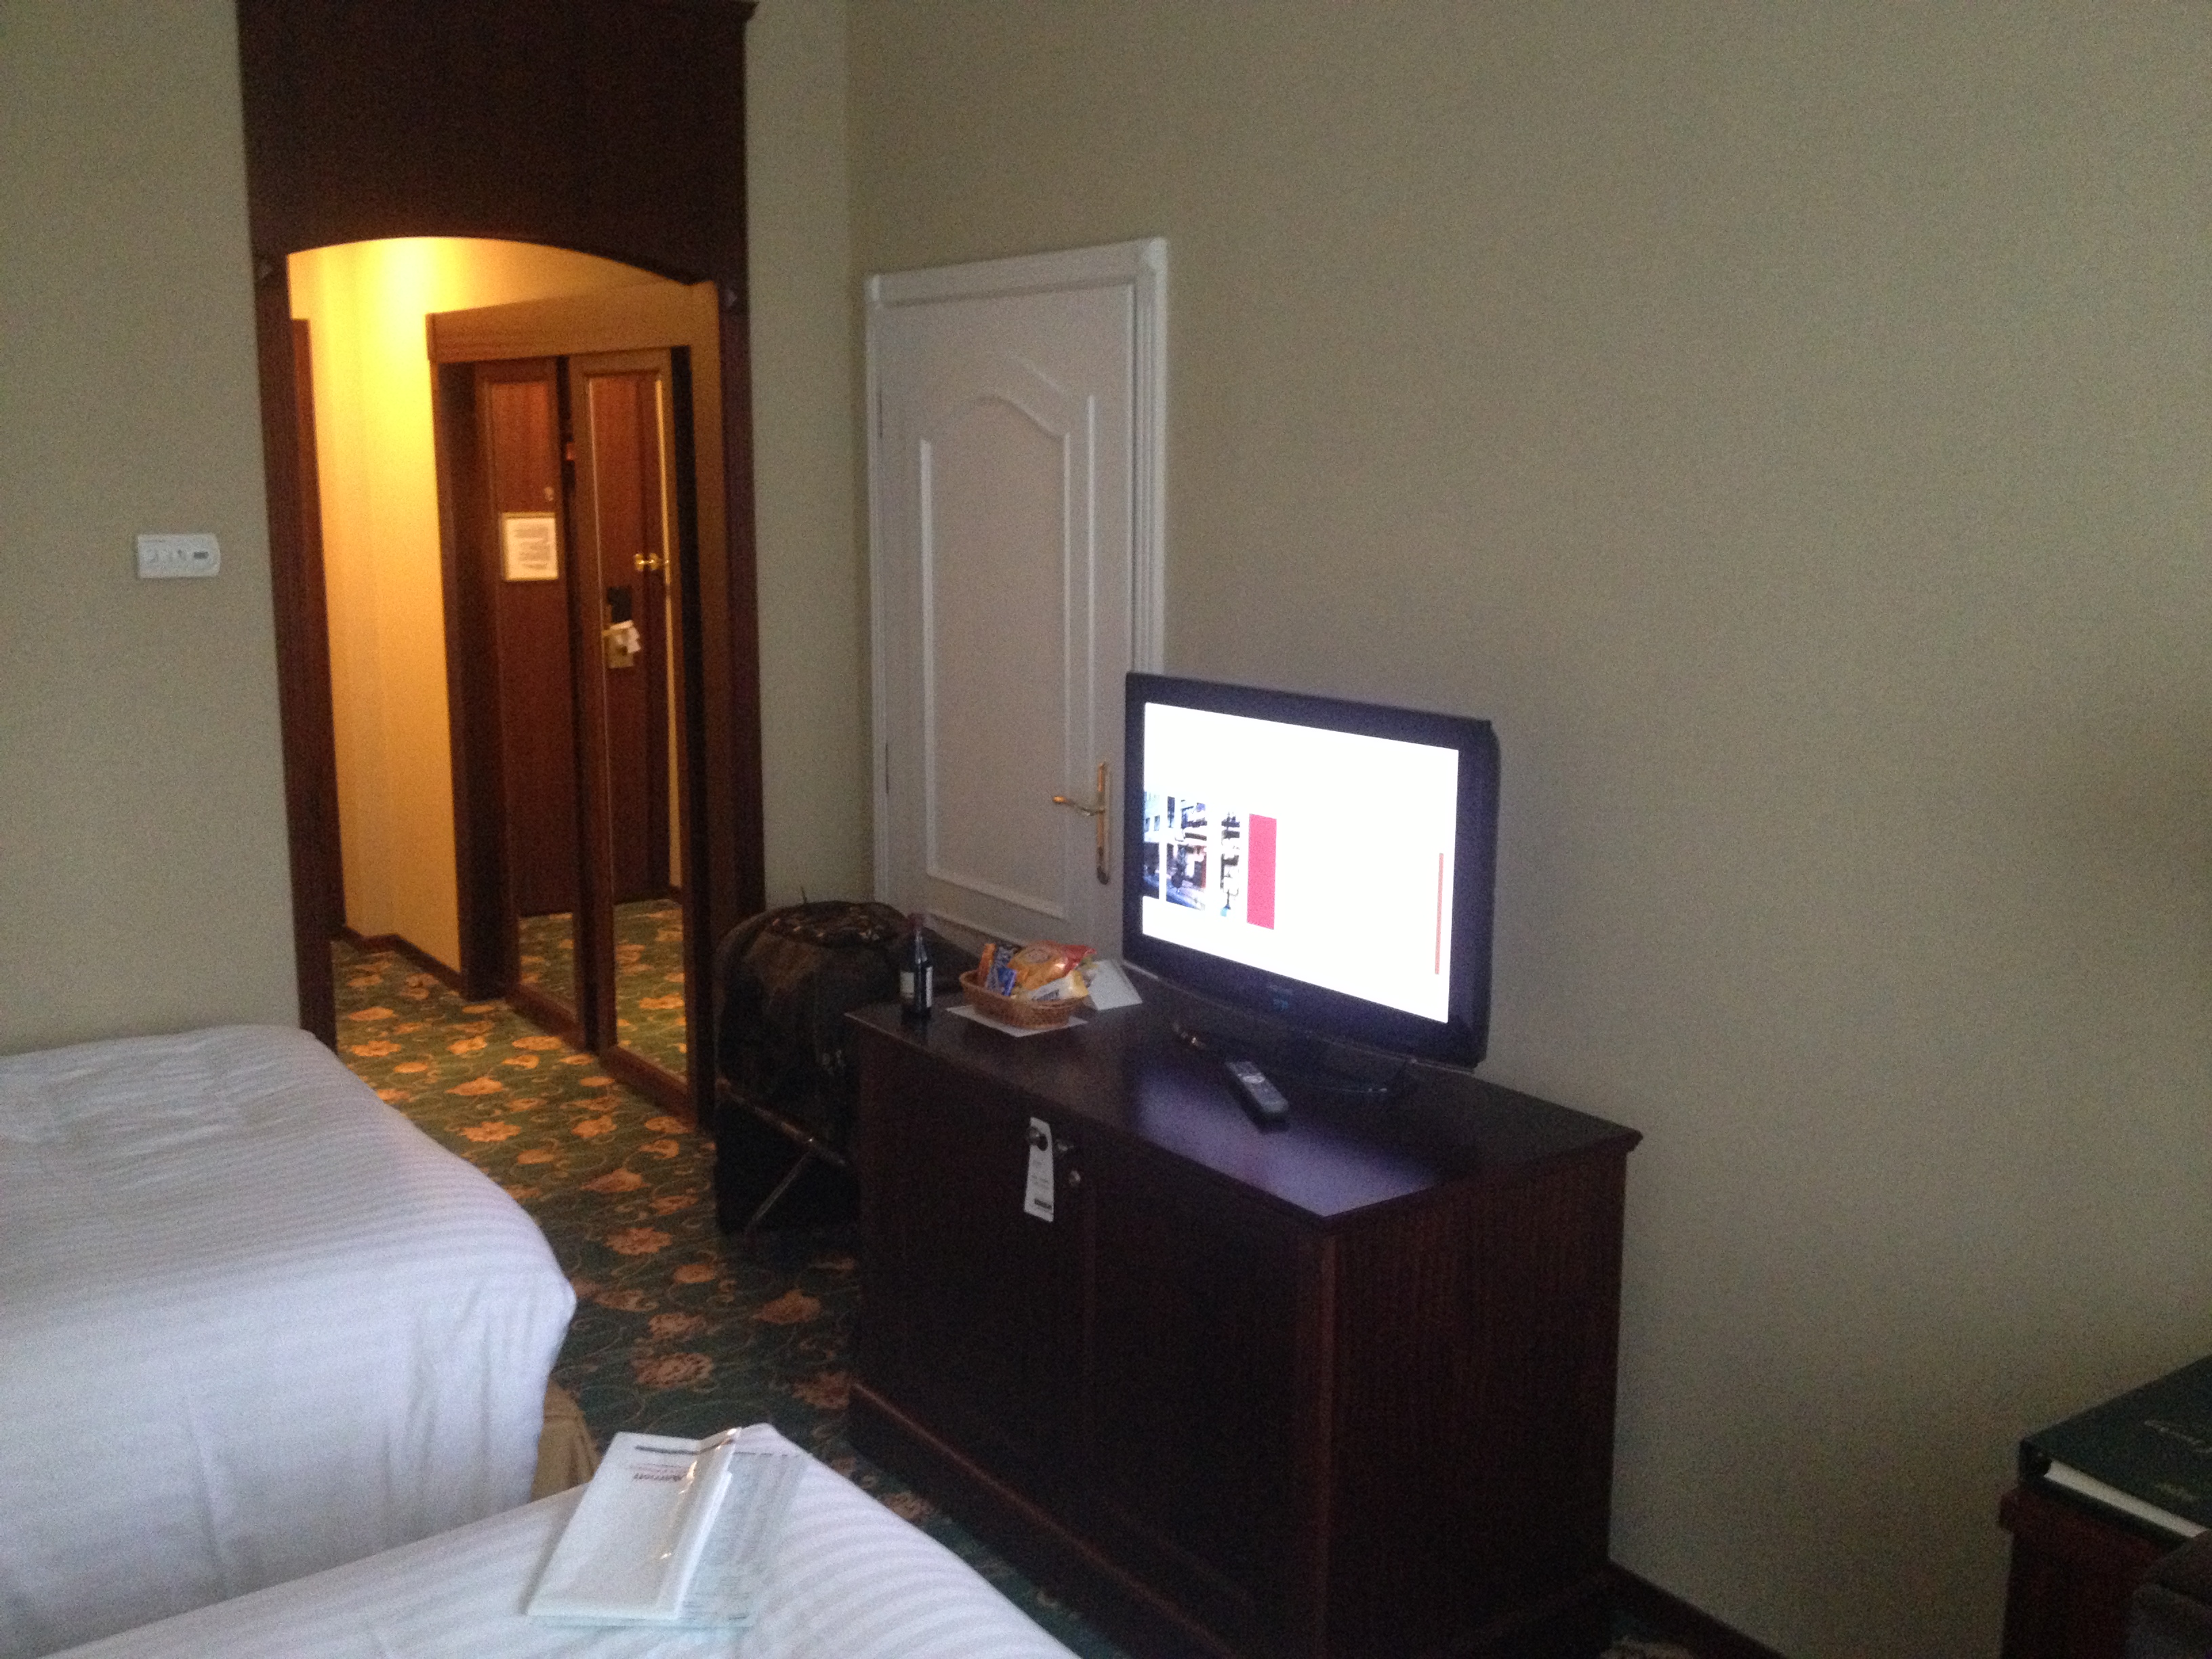 a tv on a dresser in a hotel room